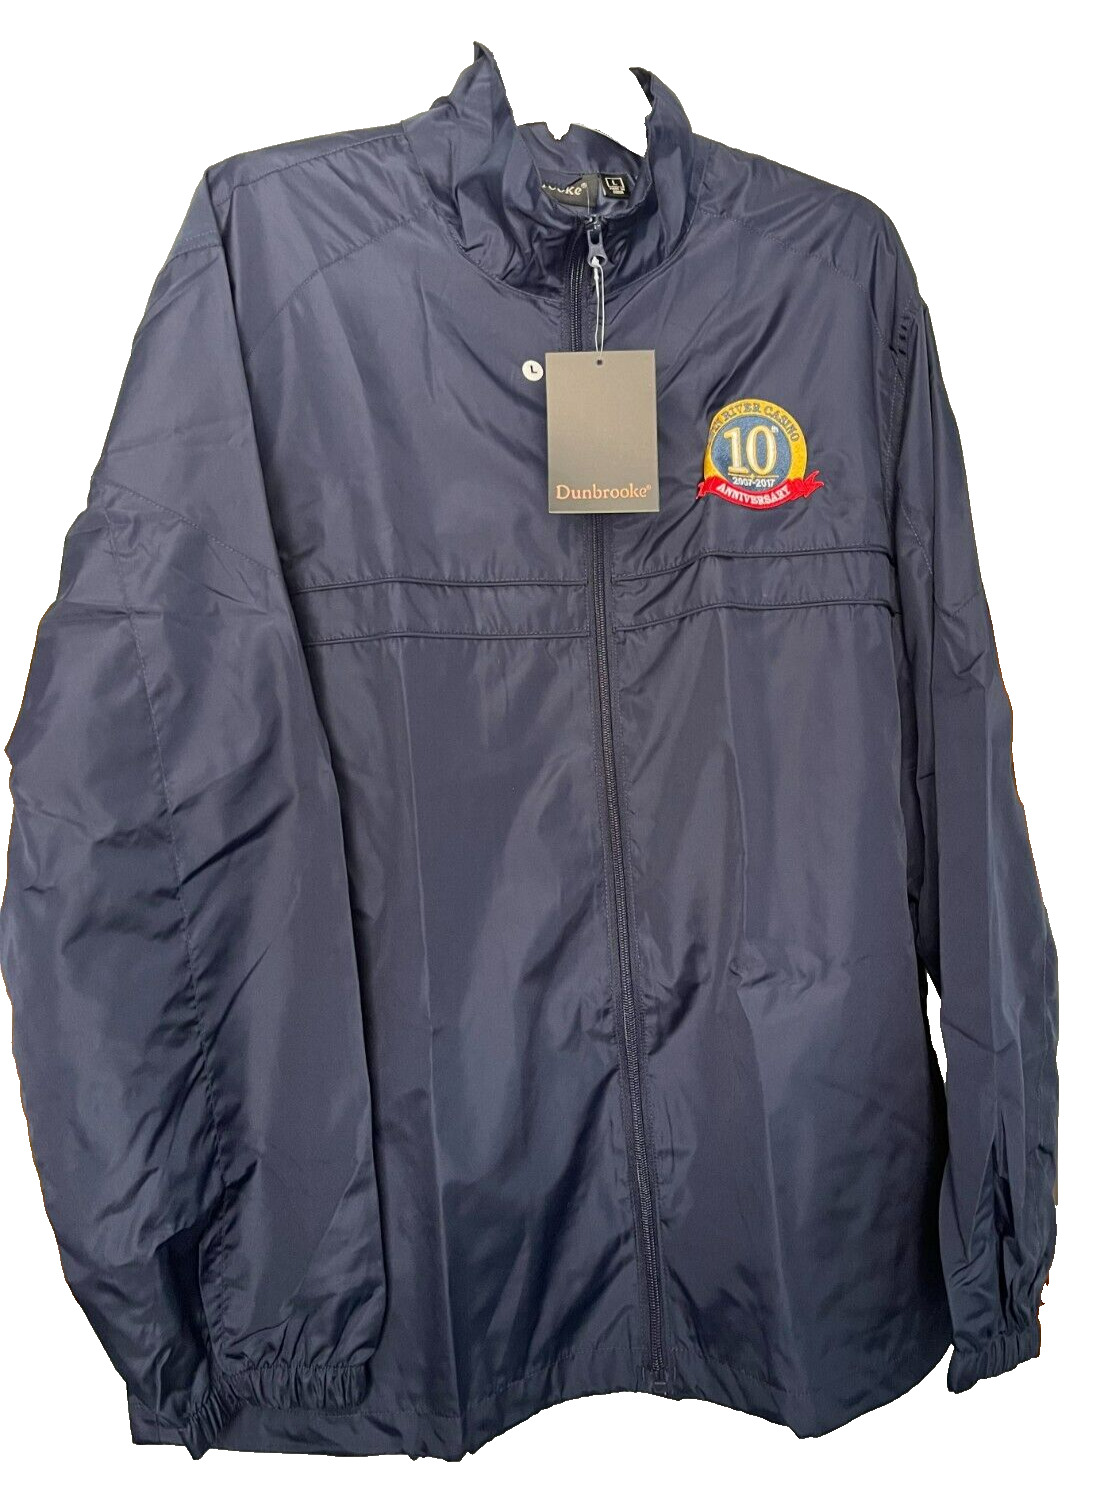 Twin River Casino 10th Anniversary Jacket - Dunbrooke, Navy Blue, Size Lg, New